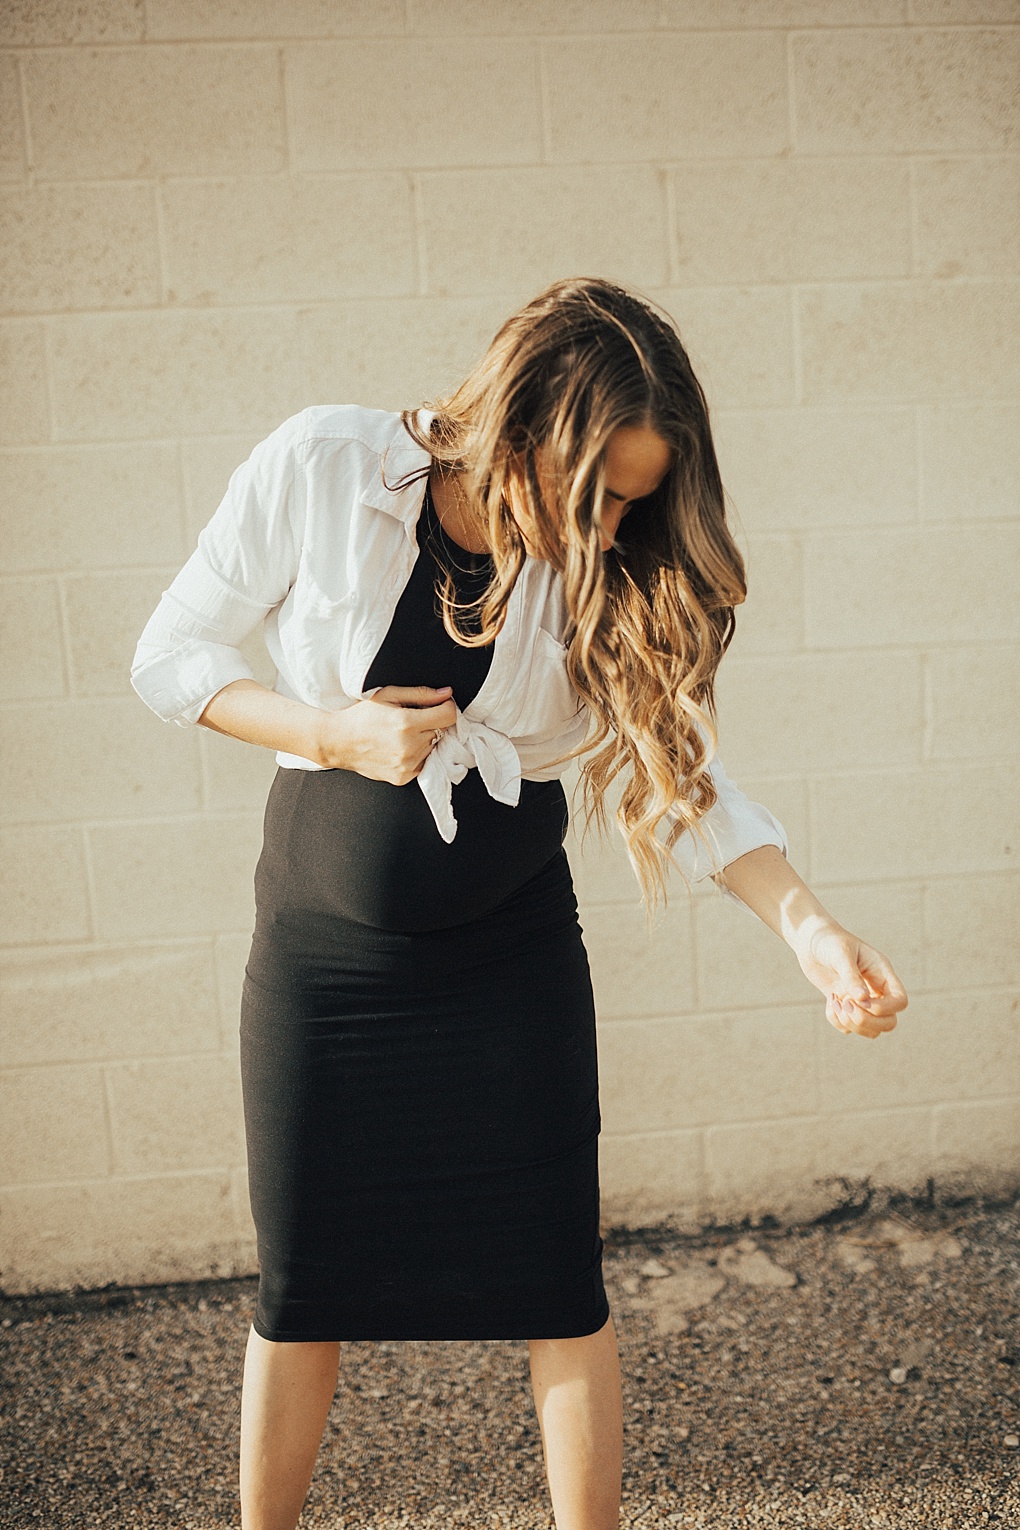 Bodycon dresses are the best! See how Utah Style Blogger Dani Marie is styling bodycon dresses!